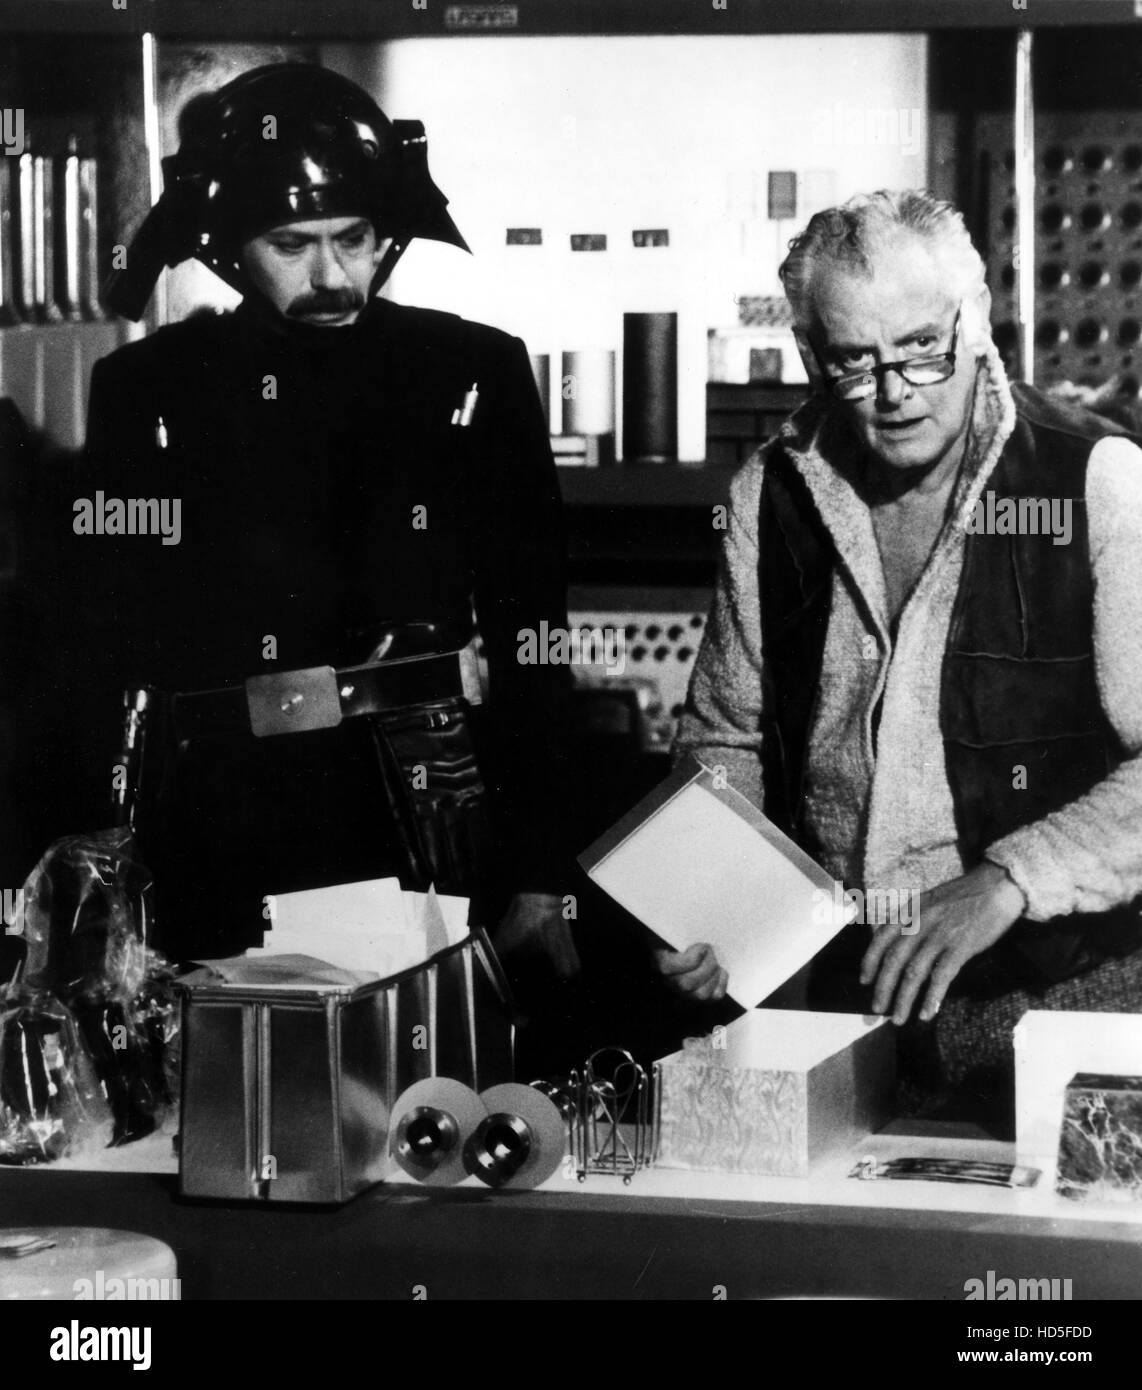 THE STAR WARS HOLIDAY SPECIAL, Art Carney, 1978. (c) Lucasfilm, Ltd./Courtesy: Everett Collection. Stock Photo